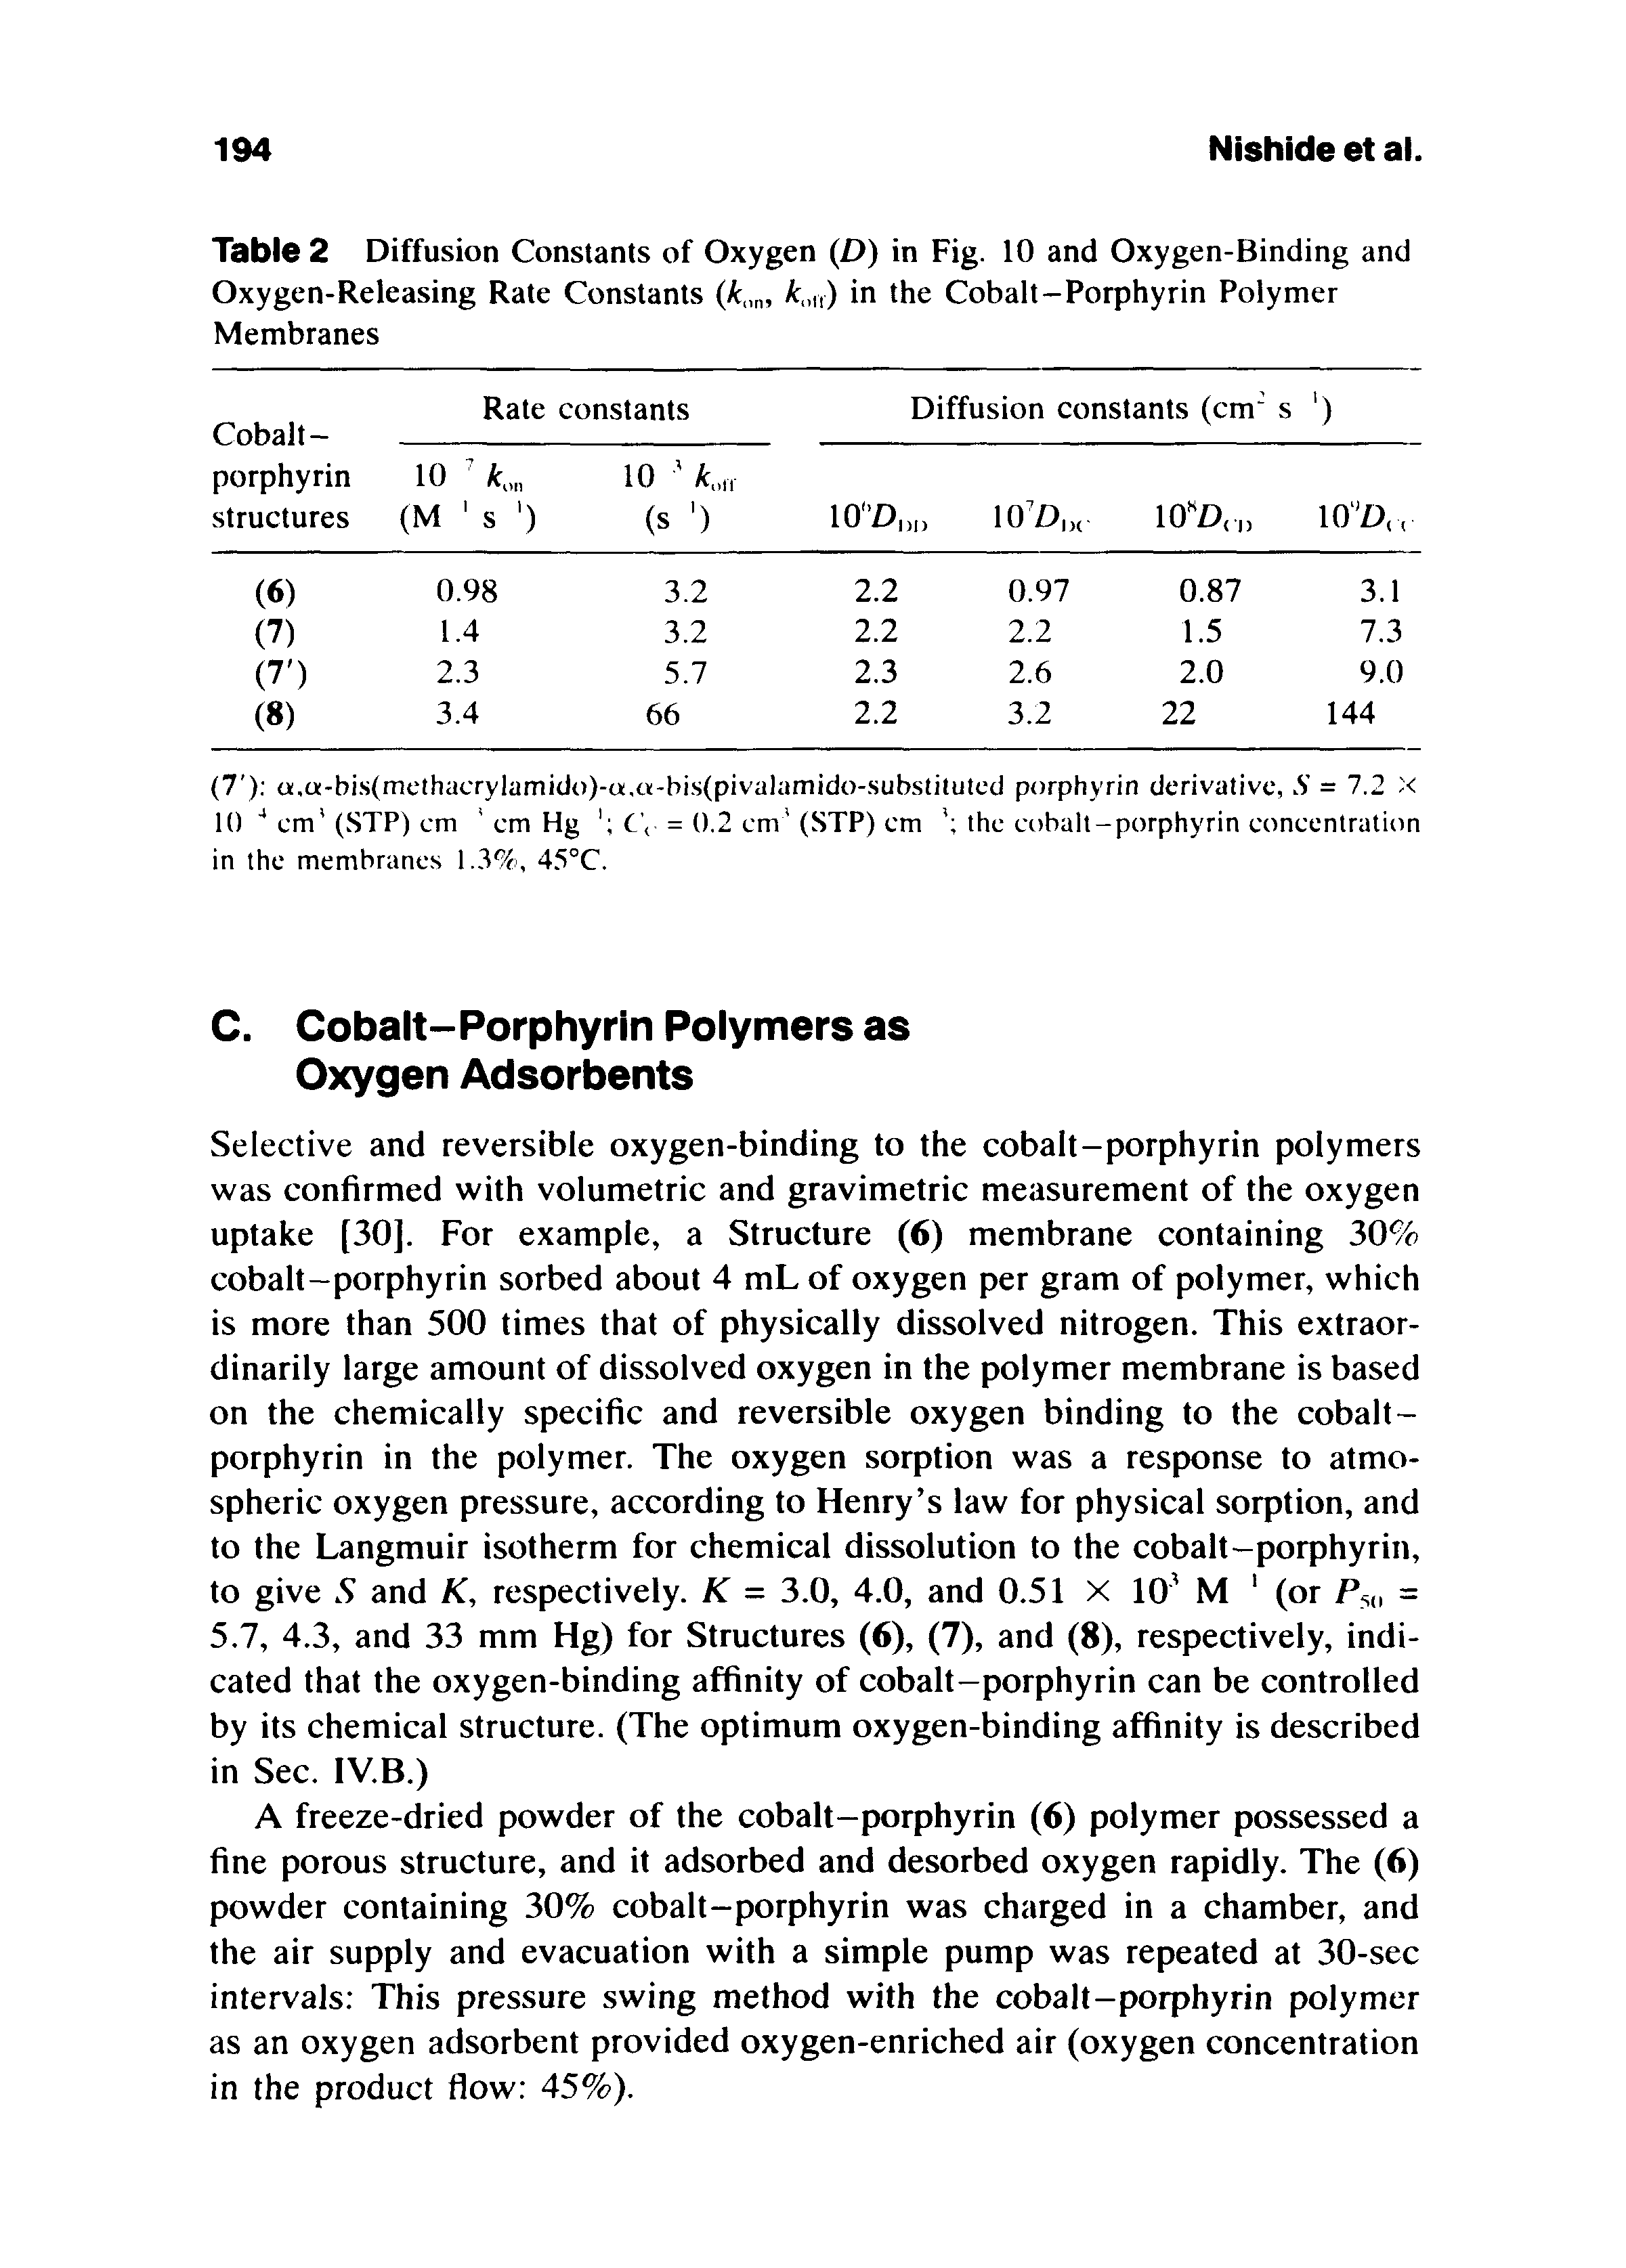 Table 2 Diffusion Constants of Oxygen (D) in Fig. 10 and Oxygen-Binding and Oxygen-Releasing Rate Constants in the Cobalt-Porphyrin Polymer...